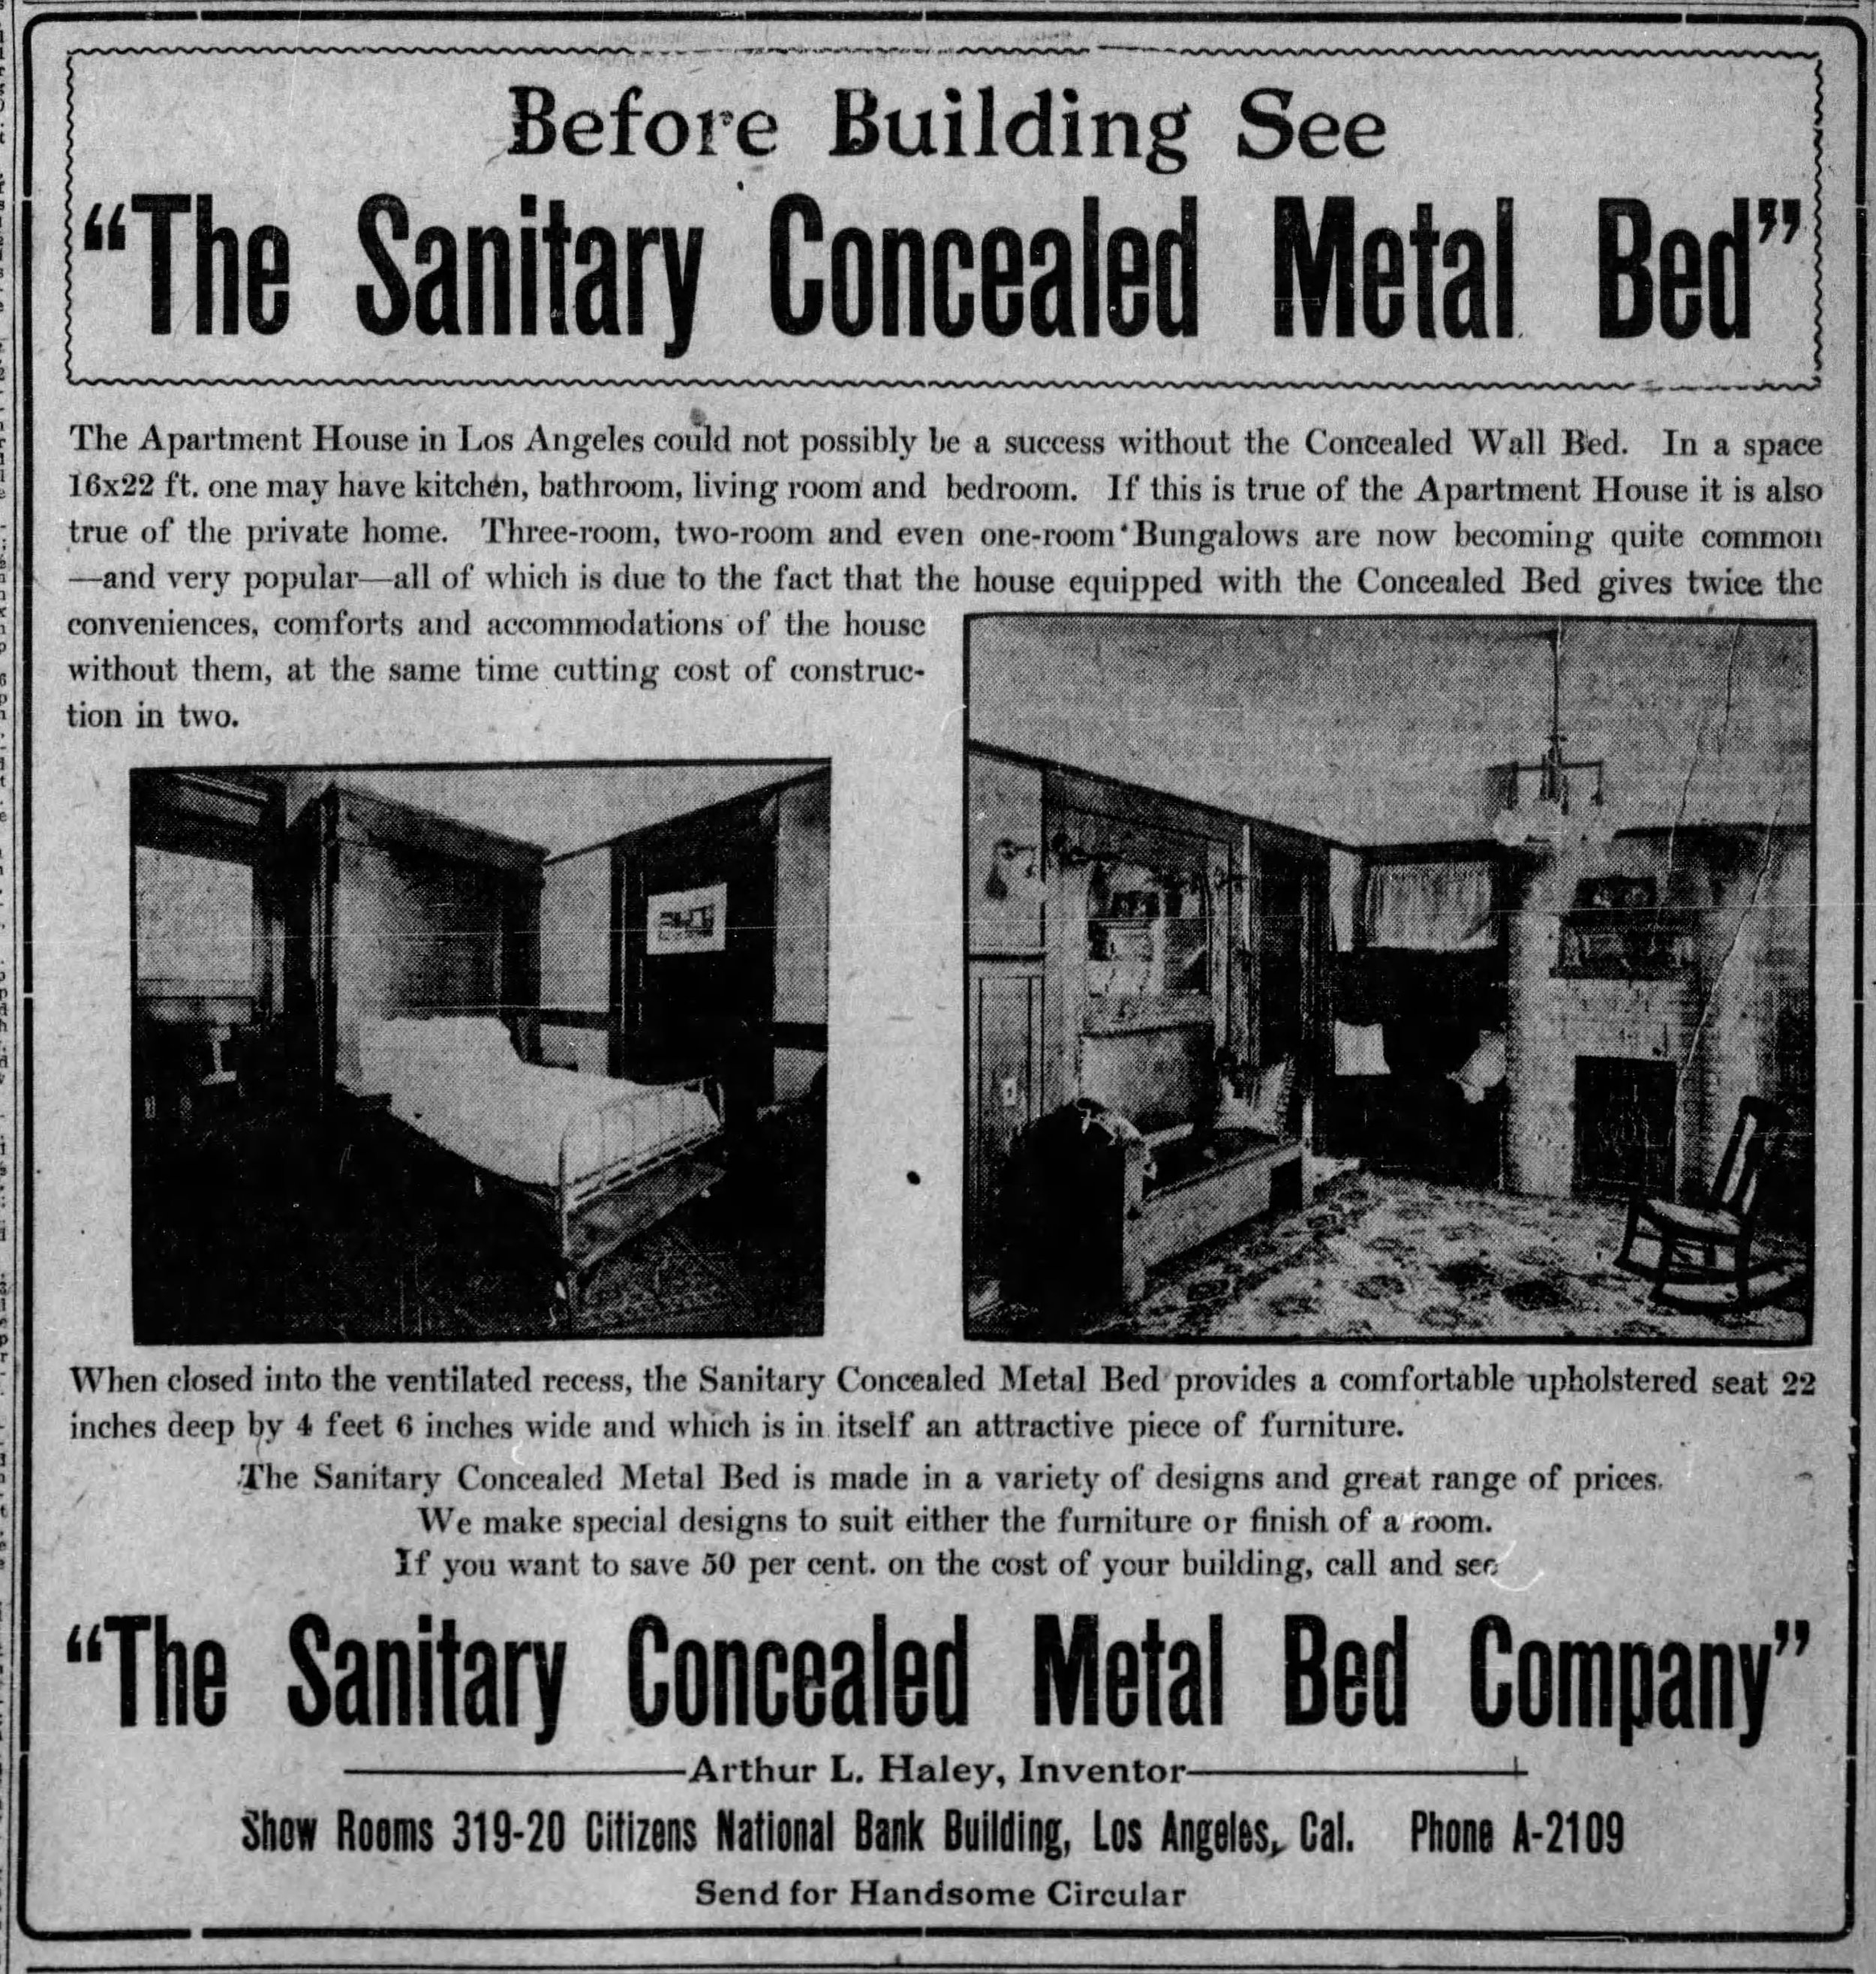 Advertisement for the Sanitary Concealed Metal Bed